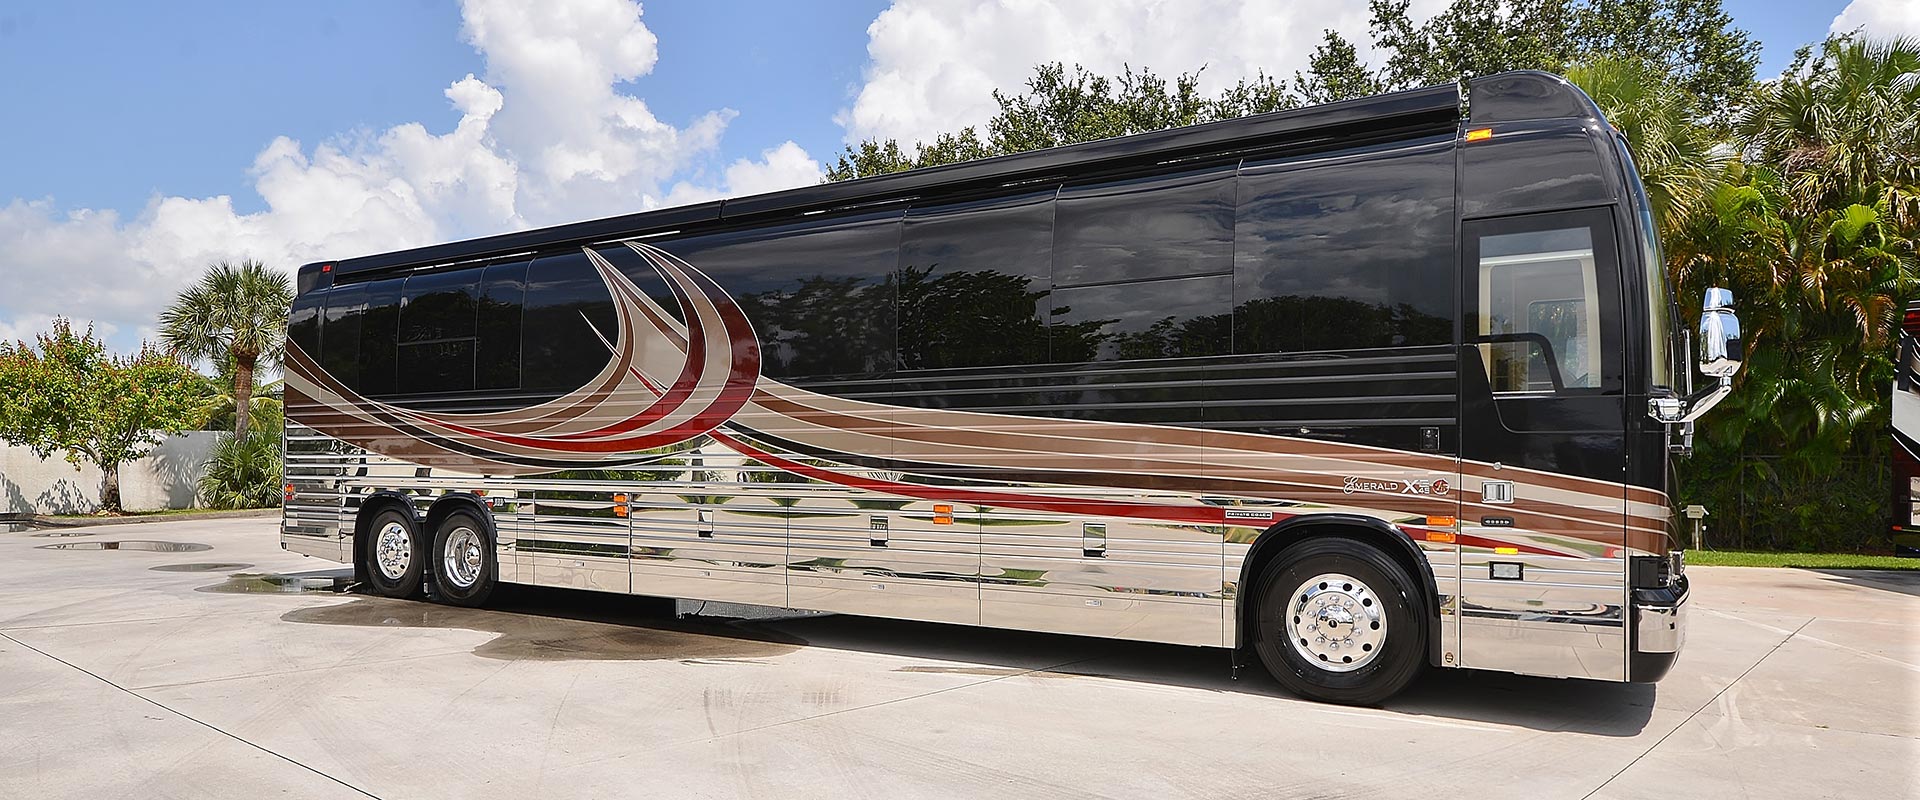 2017 Emerald #M5378 exterior entry side front view of motorcoach on the lot